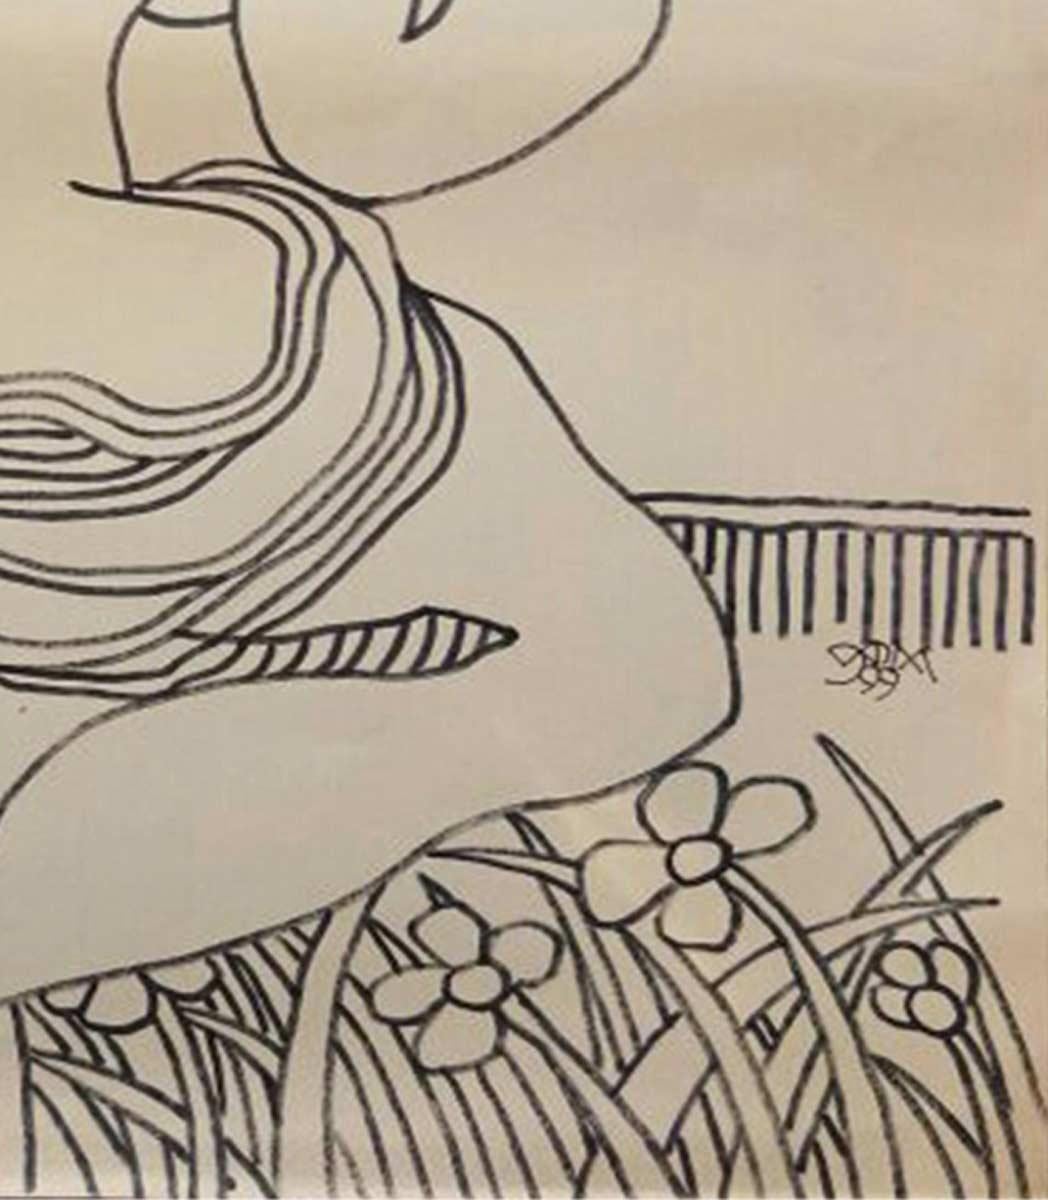 Nude Woman in Garden, Drawing, Marker on Paper by Modern Indian Artist